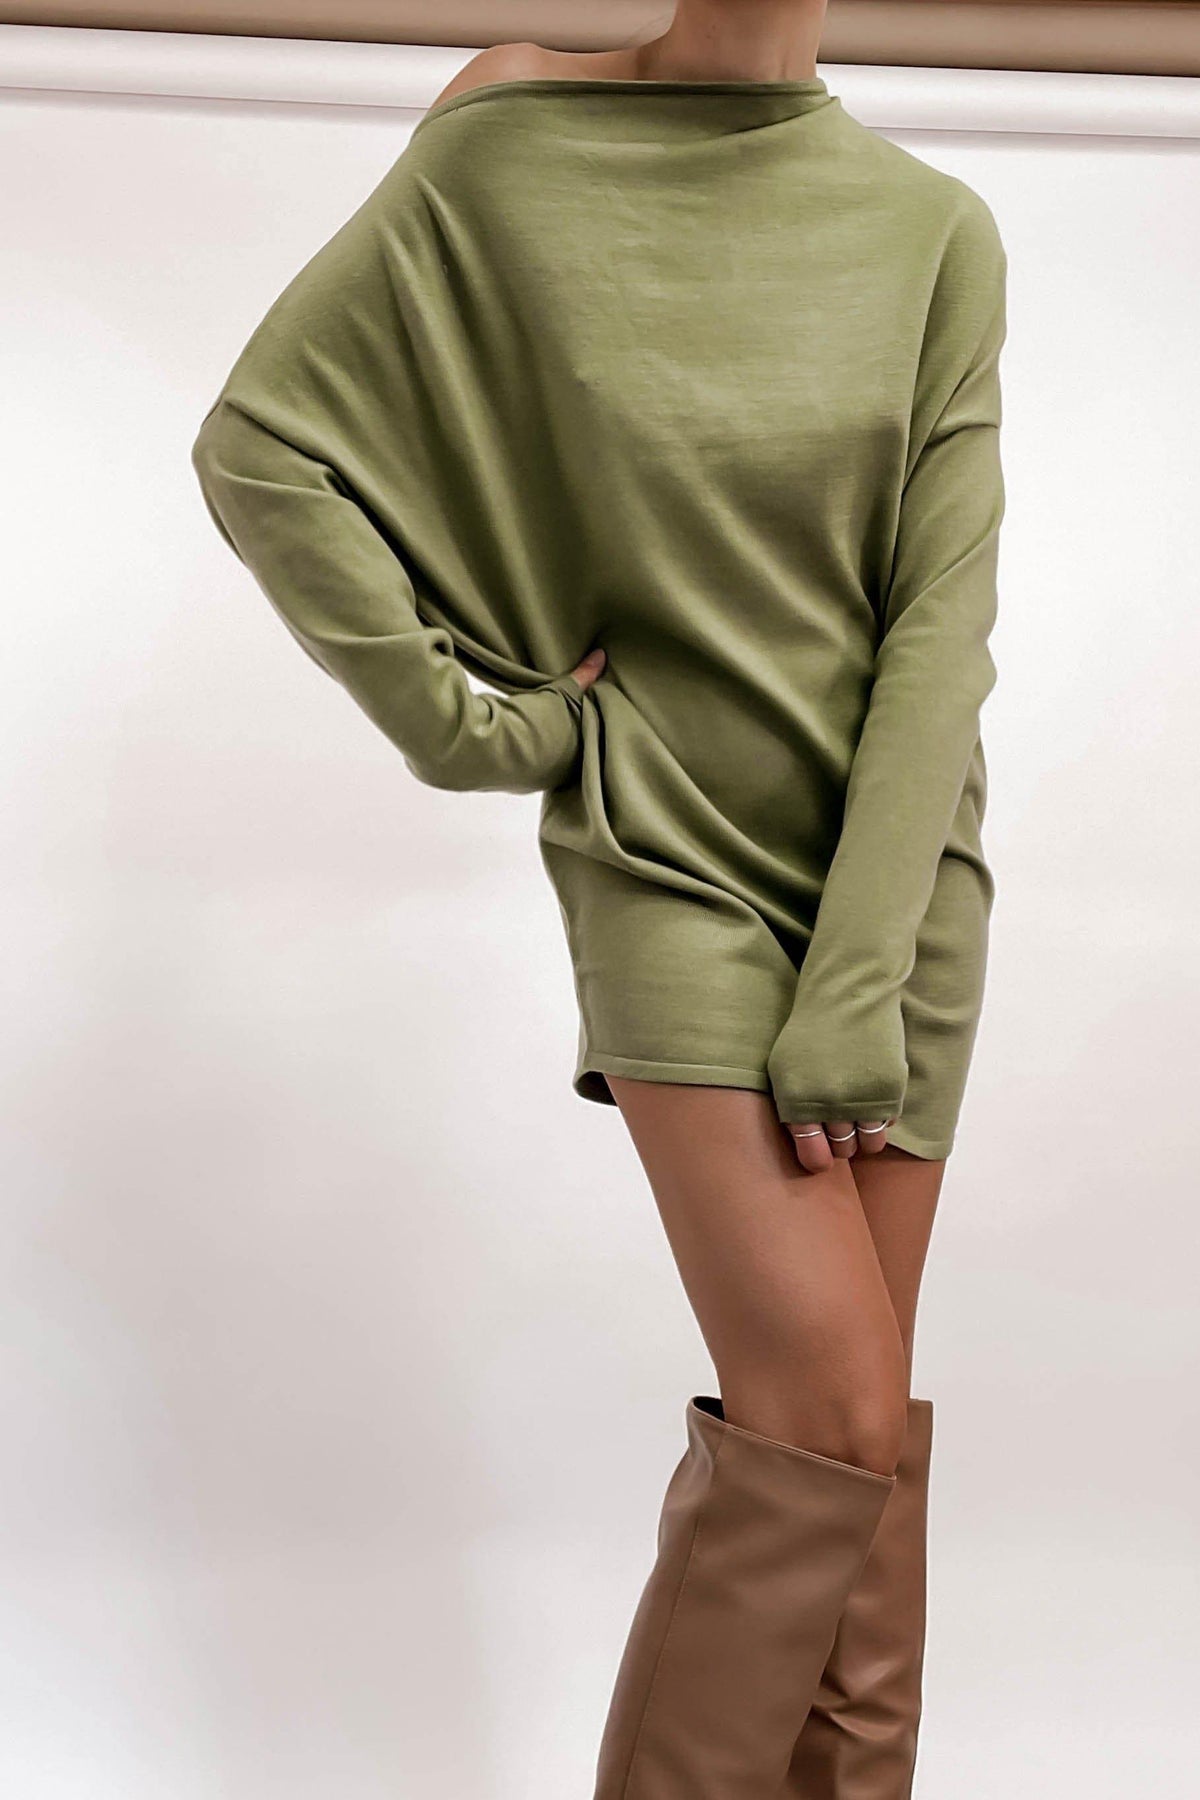 Urica Dress, ACRYLIC &amp; WOOL, ACRYLIC AND WOOL, DRESS, DRESSES, GREEN, LONG SLEEVE, NEW ARRIVALS, WOOL &amp; ACRYLIC, WOOL AND ACRYLIC, Our New Urica Dress Is Now Only $65.00 Exclusive At Mishkah, Our New Urica Dress is now only $65.00-We Have The Latest Women&#39;s Tops @ Mishkah Online Fashion Boutique-MISHKAH